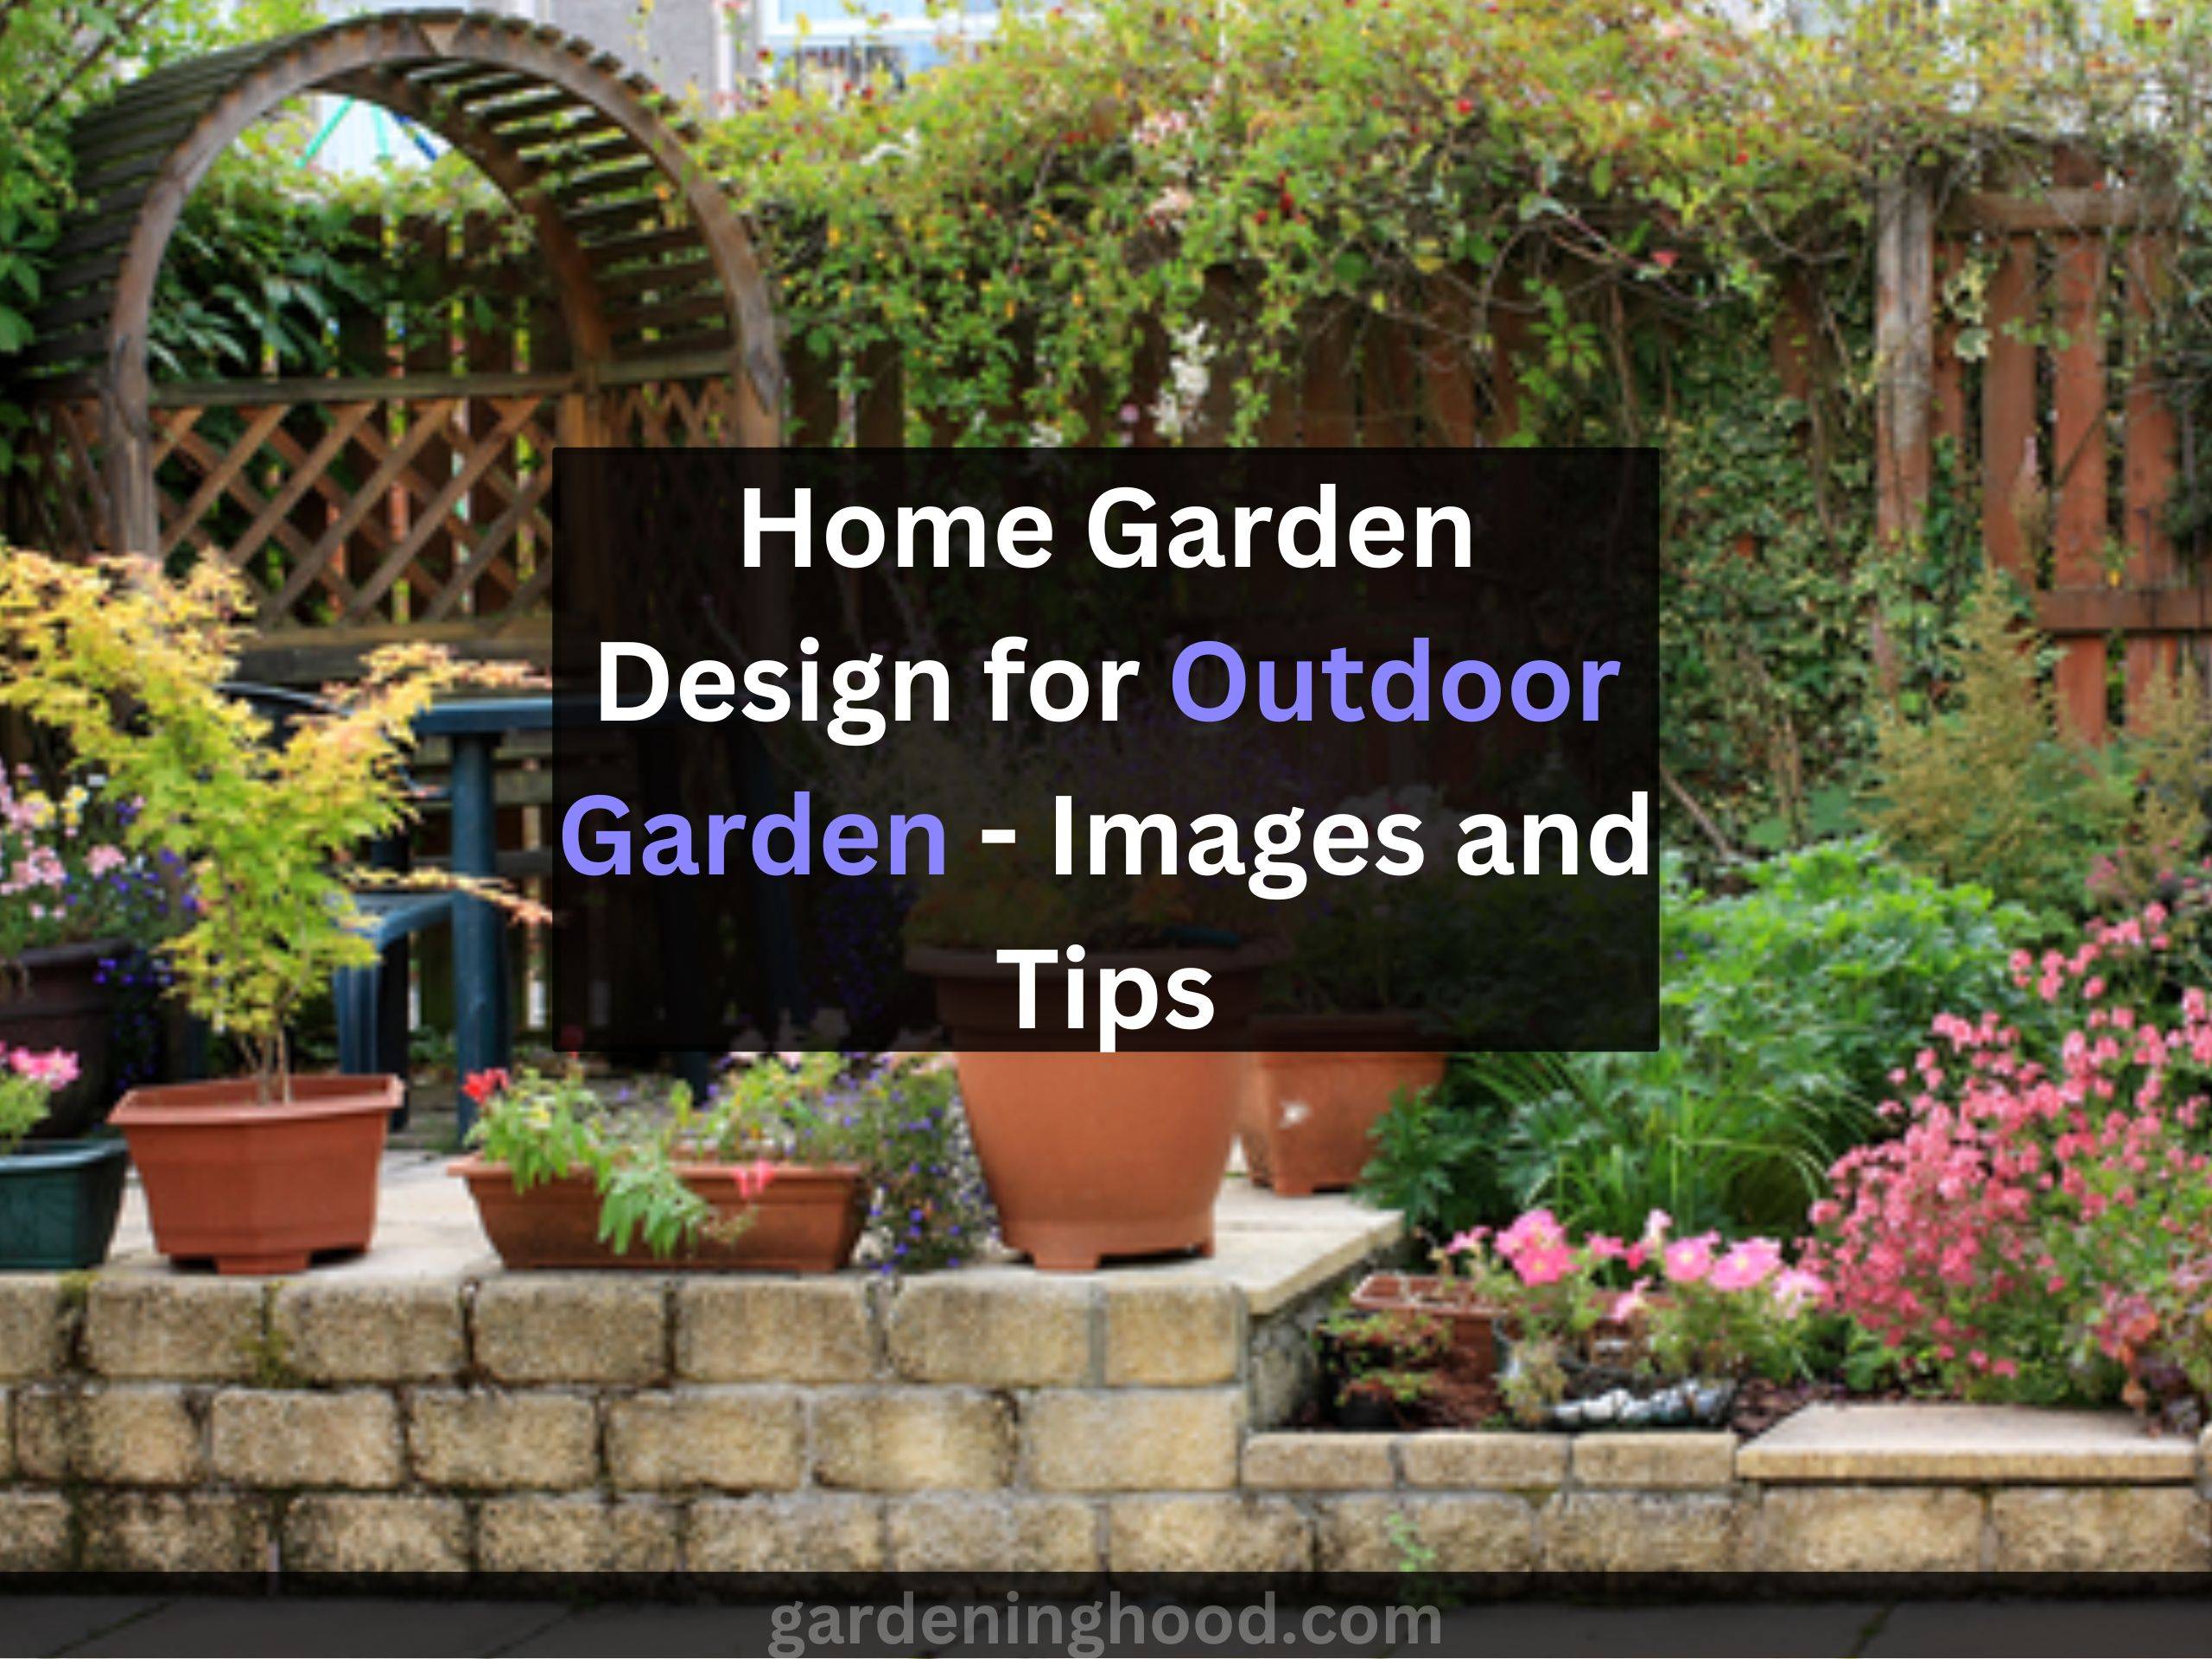 Home Garden Designs for Outdoor Gardens - Images and Tips